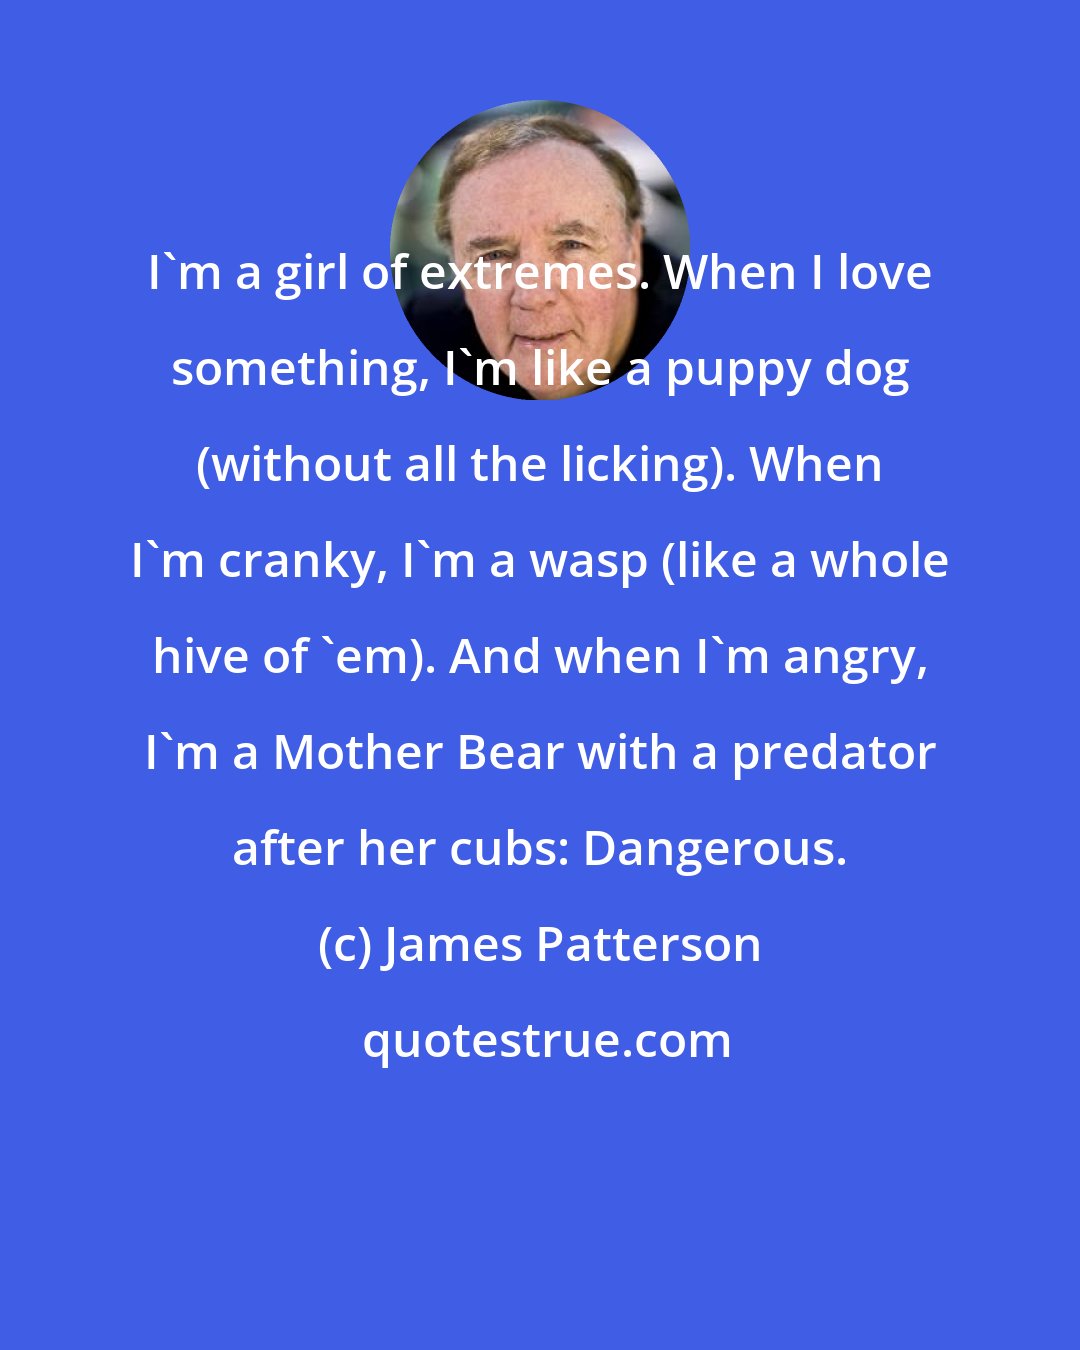 James Patterson: I'm a girl of extremes. When I love something, I'm like a puppy dog (without all the licking). When I'm cranky, I'm a wasp (like a whole hive of 'em). And when I'm angry, I'm a Mother Bear with a predator after her cubs: Dangerous.